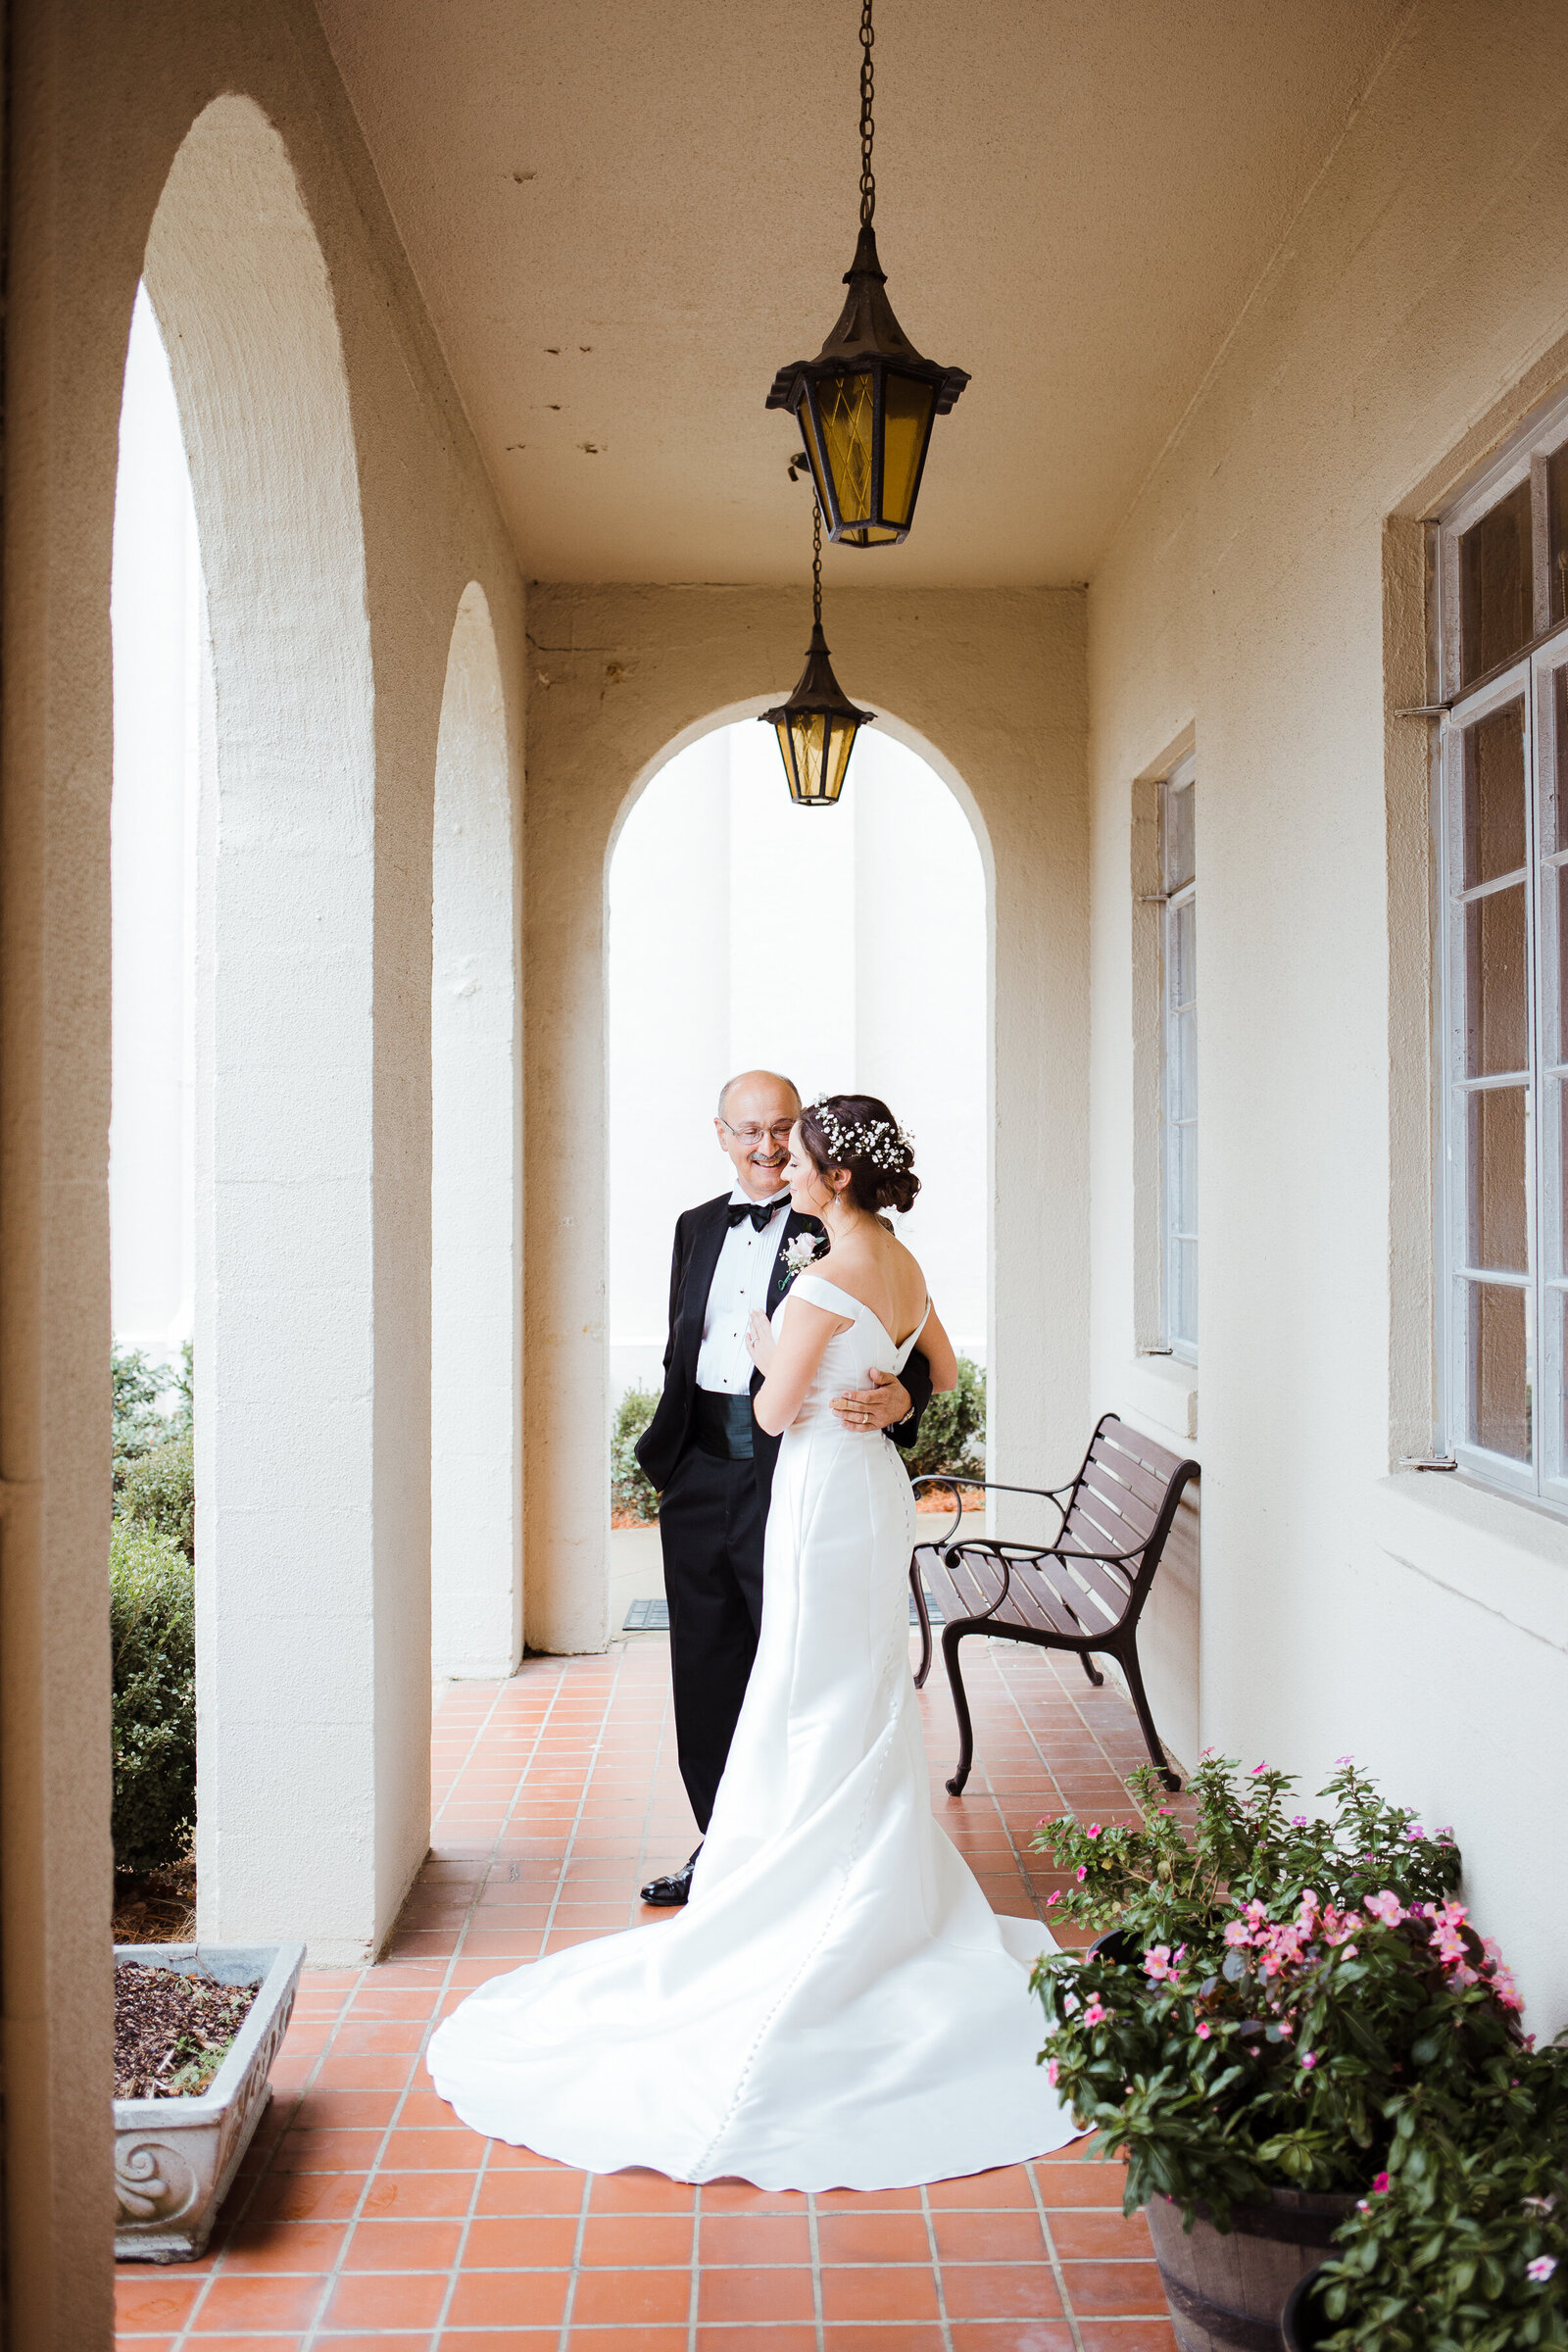 Christine Quarte Photography - First Look with Dad Bride